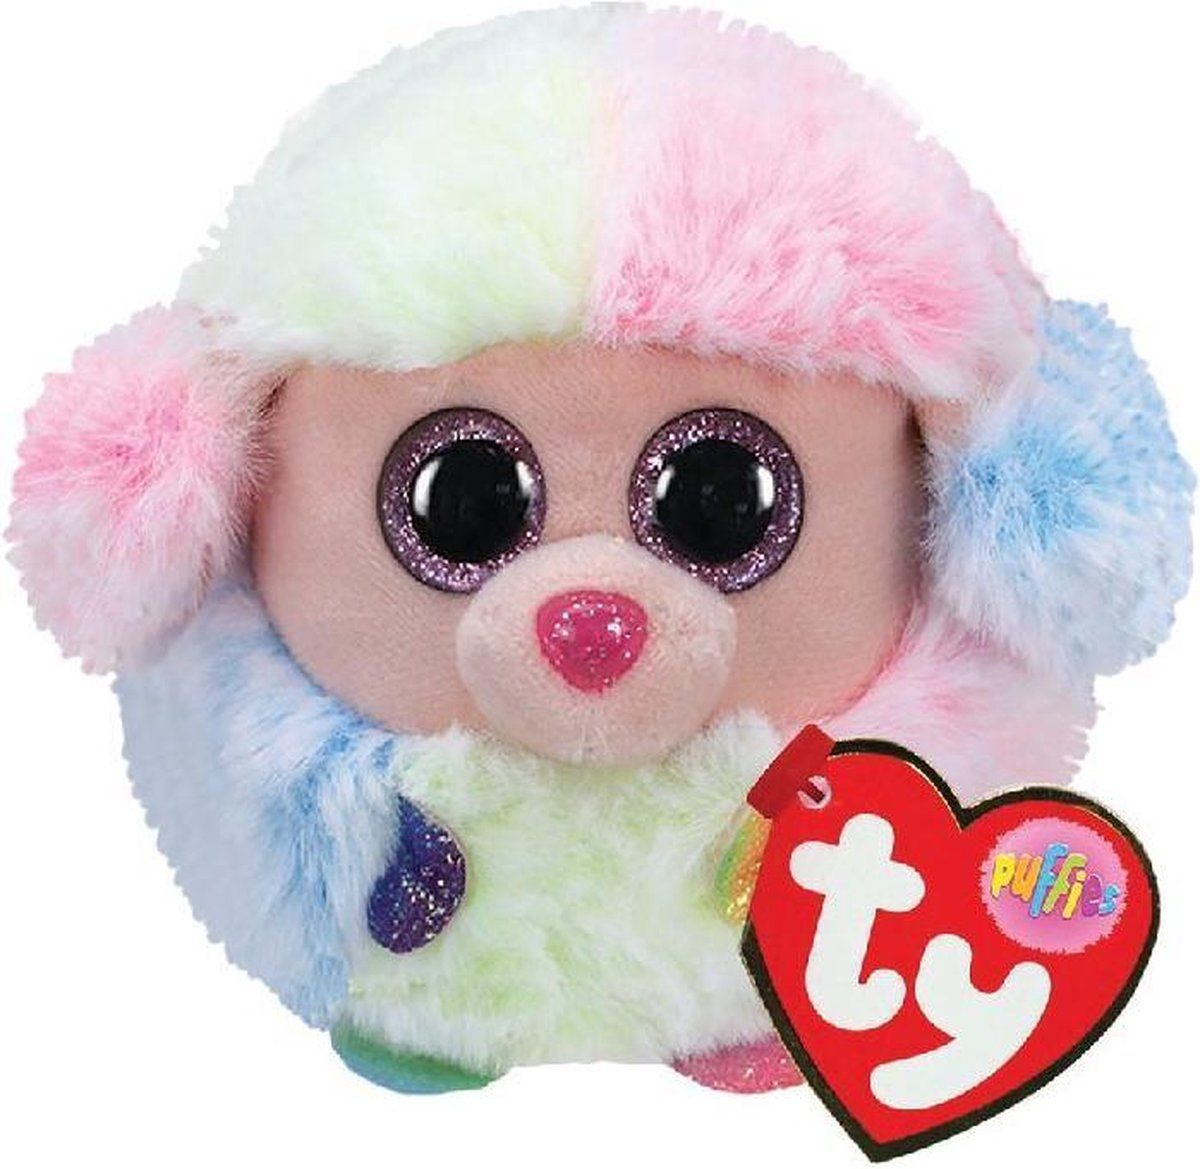 Top1Toys Ty Teeny Puffies Rainbow Poodle 10cm